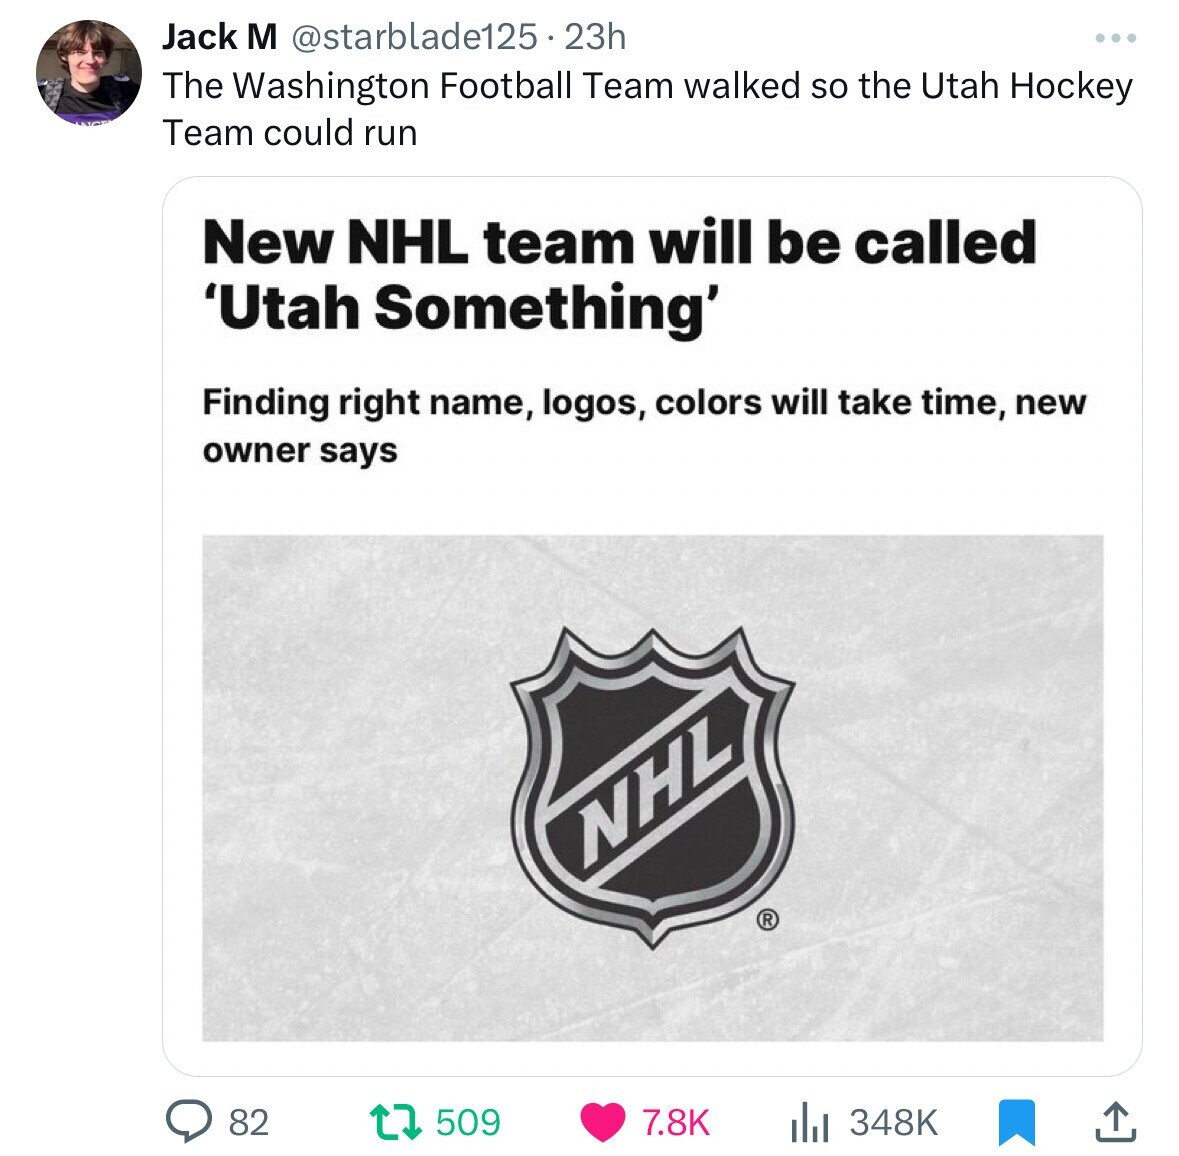 Jack M @starblade125 . 1 23h The Washington Football Team walked so the Utah Hockey Team could run New NHL team will be called 'Utah Something' Finding right name, logos, colors will take time, new owner says NHL ® 82 509 7.8K 348K 